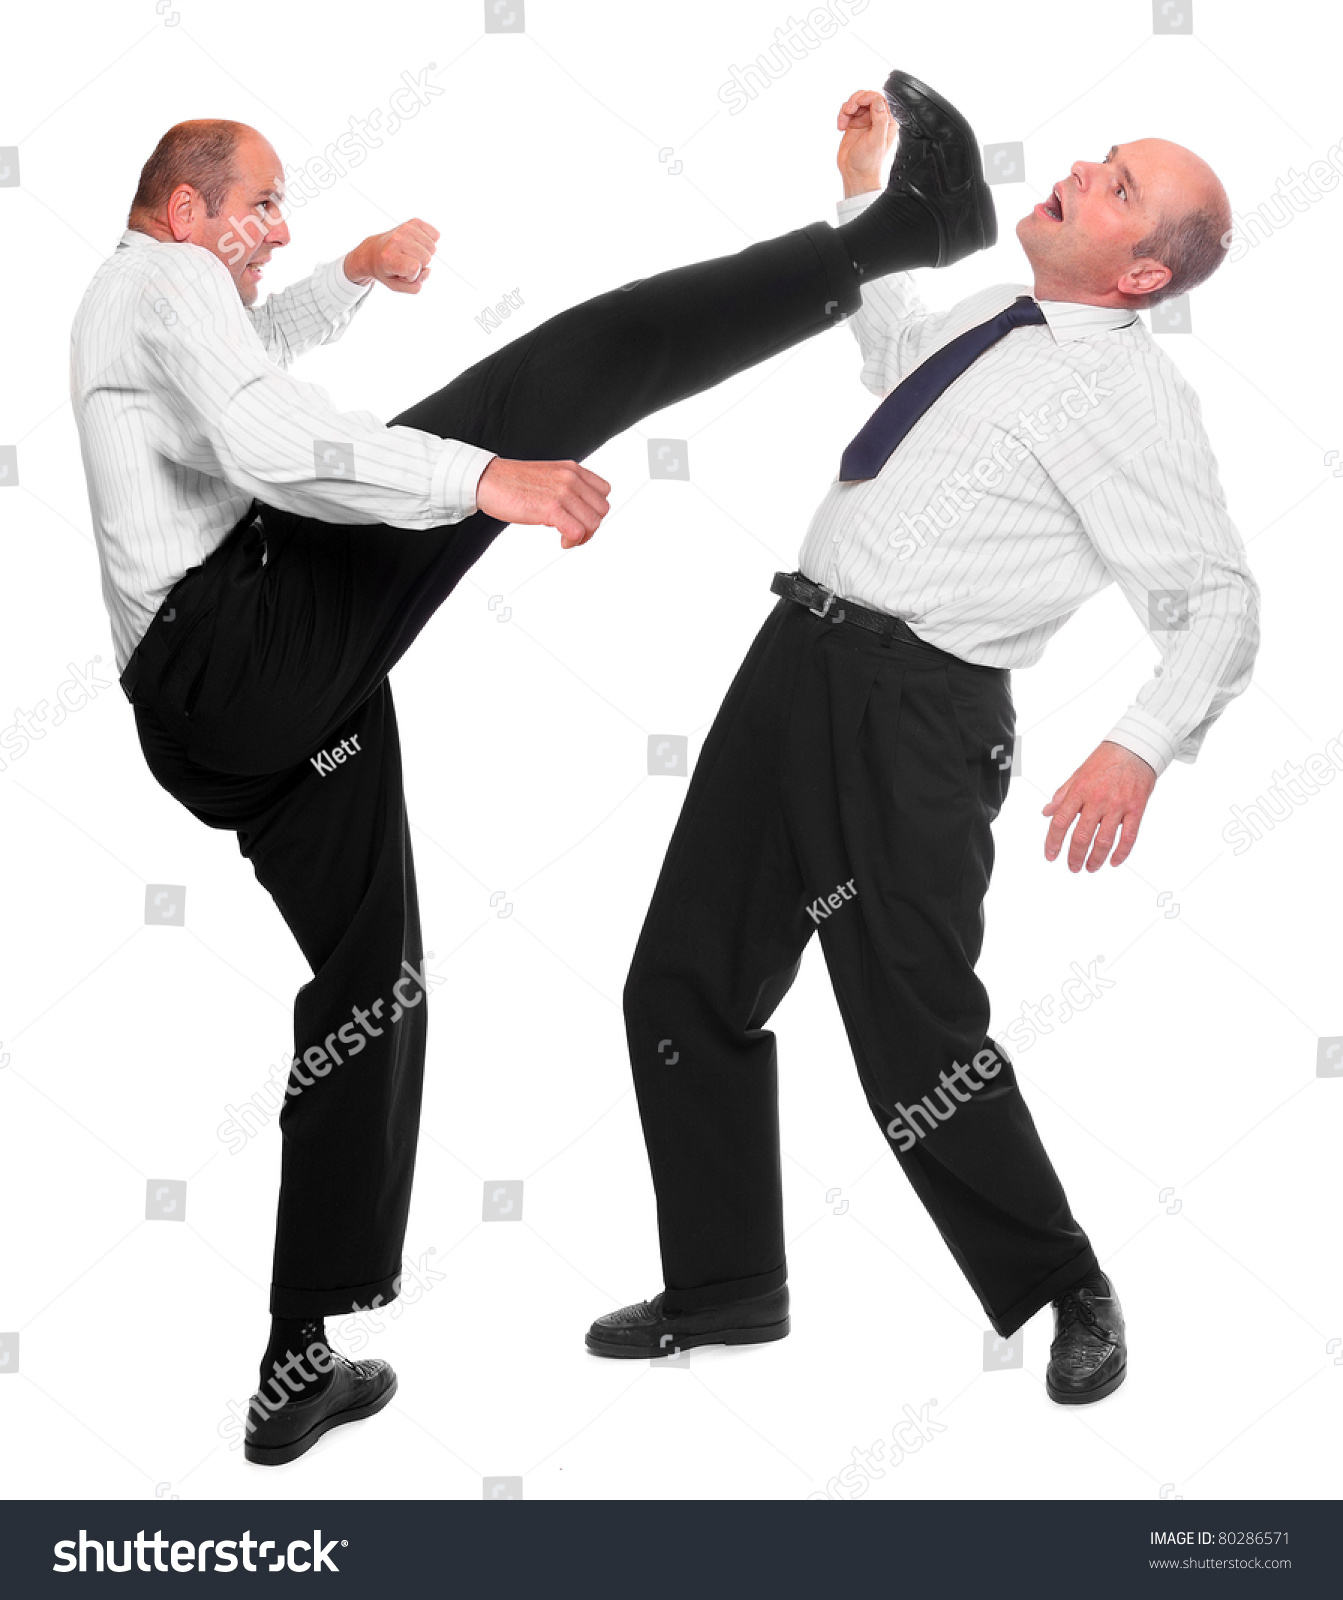 Angry Manager Kicking His Rival Funny Stock Photo 80286571 - Shutterstock